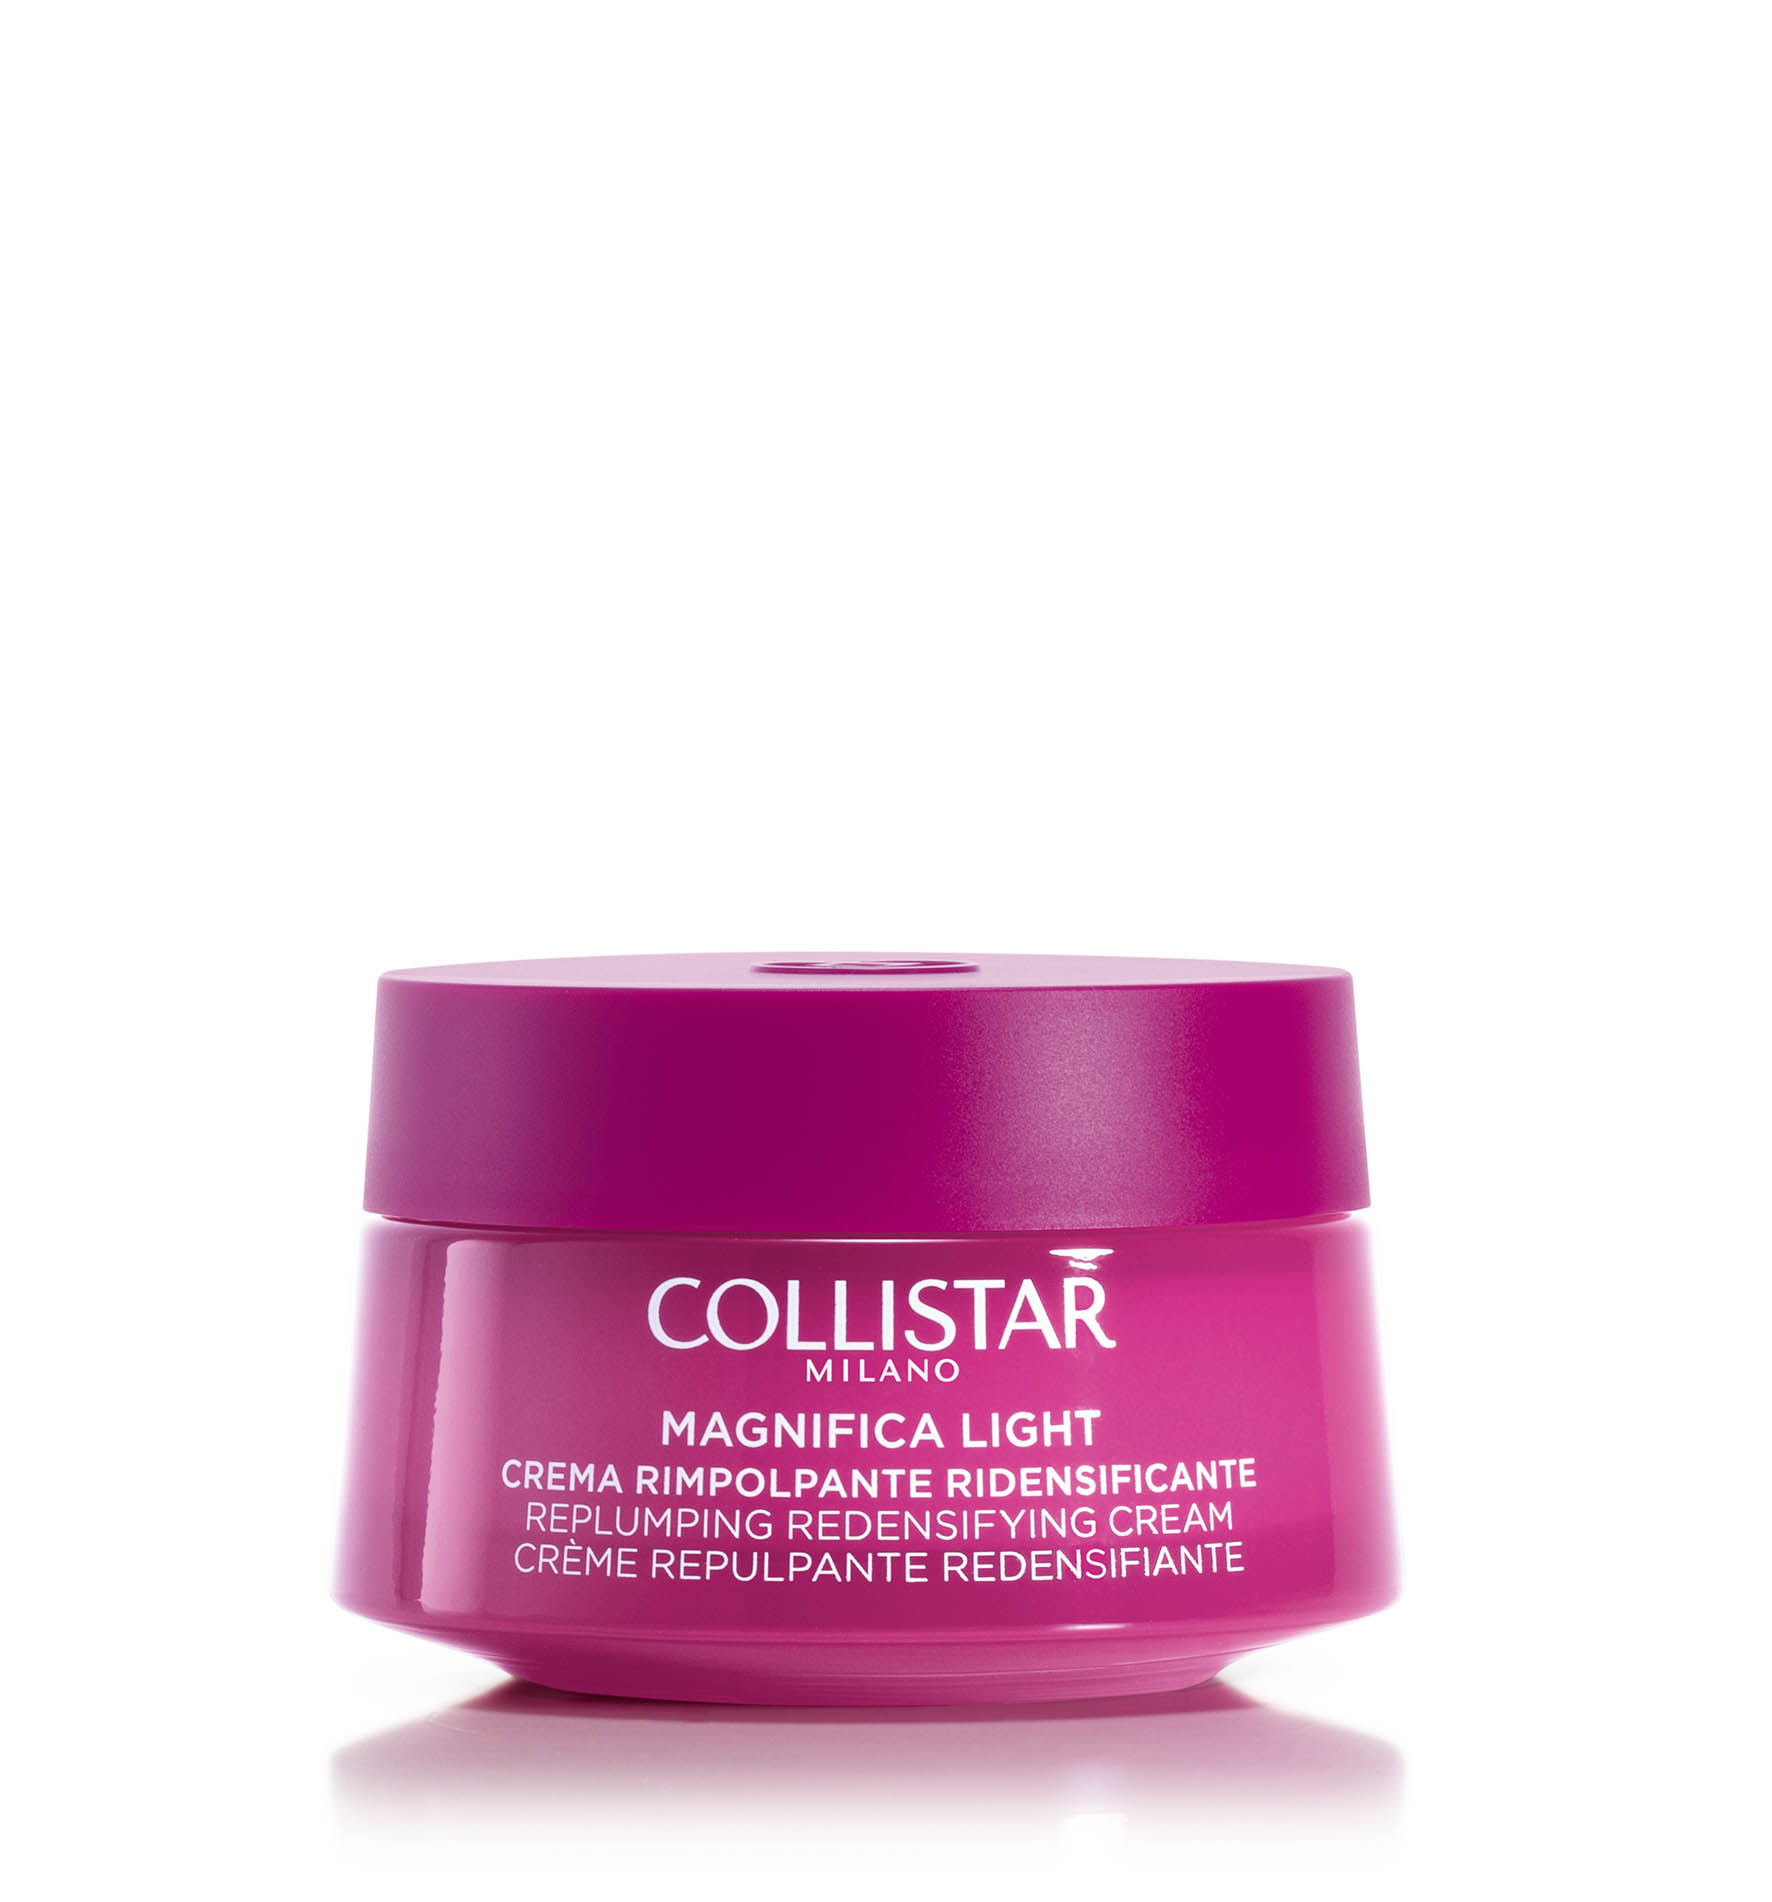 MAGNIFICA LIGHT REPLUMPING REDENSIFYING CREAM FACE AND NECK - Wrinkles | Collistar - Shop Online Ufficiale